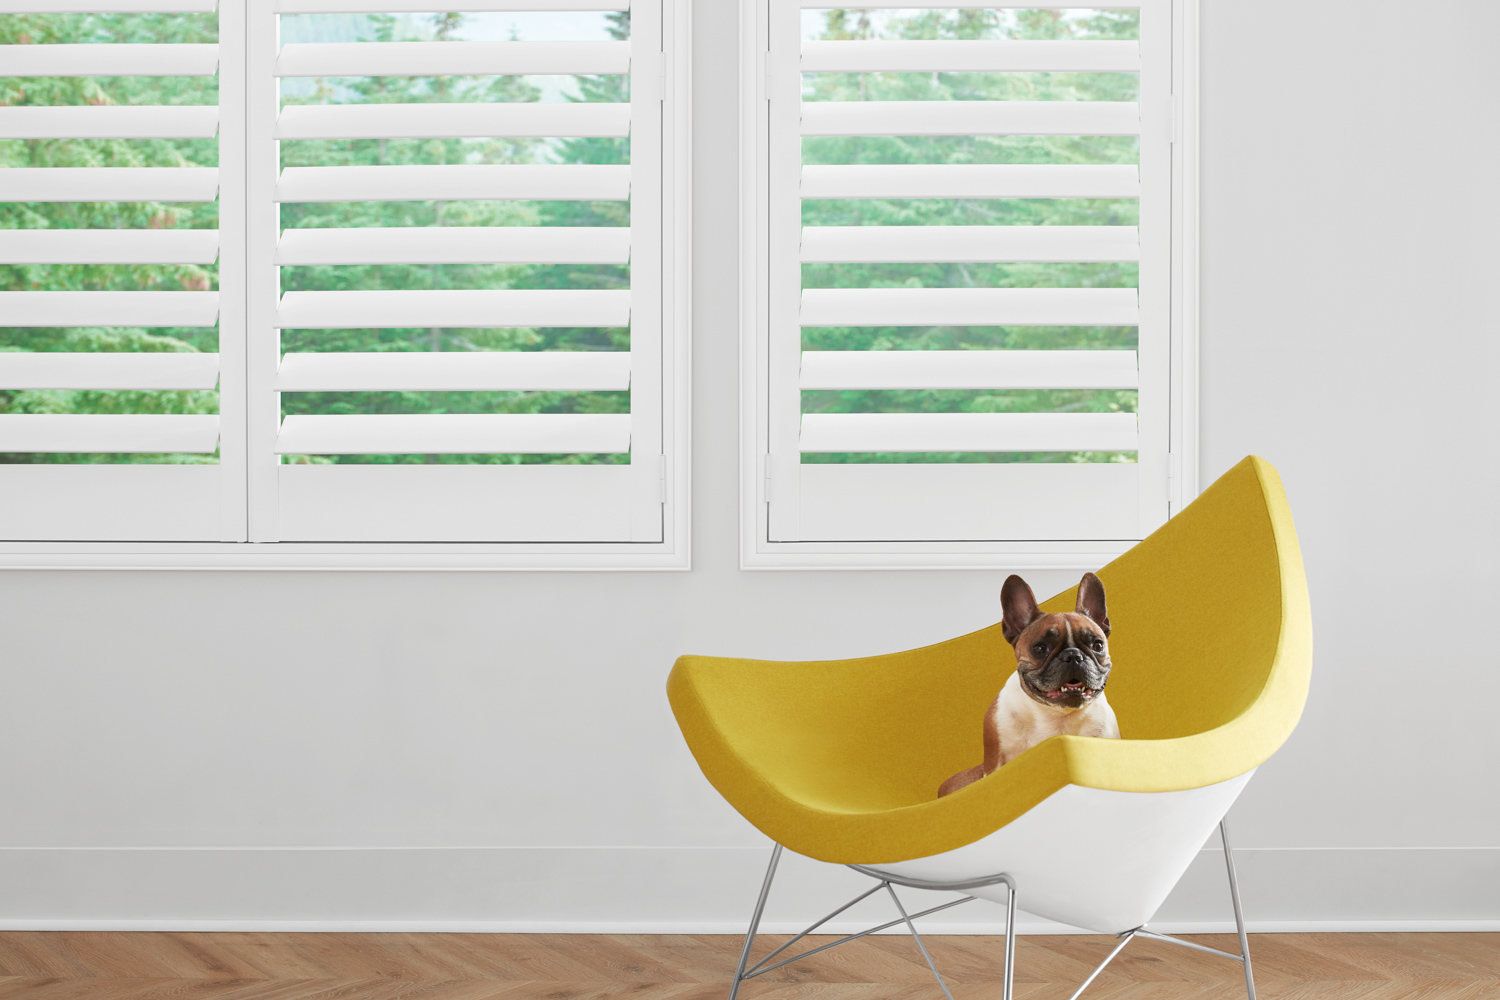 Hunter Douglas NewStyle® Hybrid Shutters provide a stylish solution for pet safety at home.